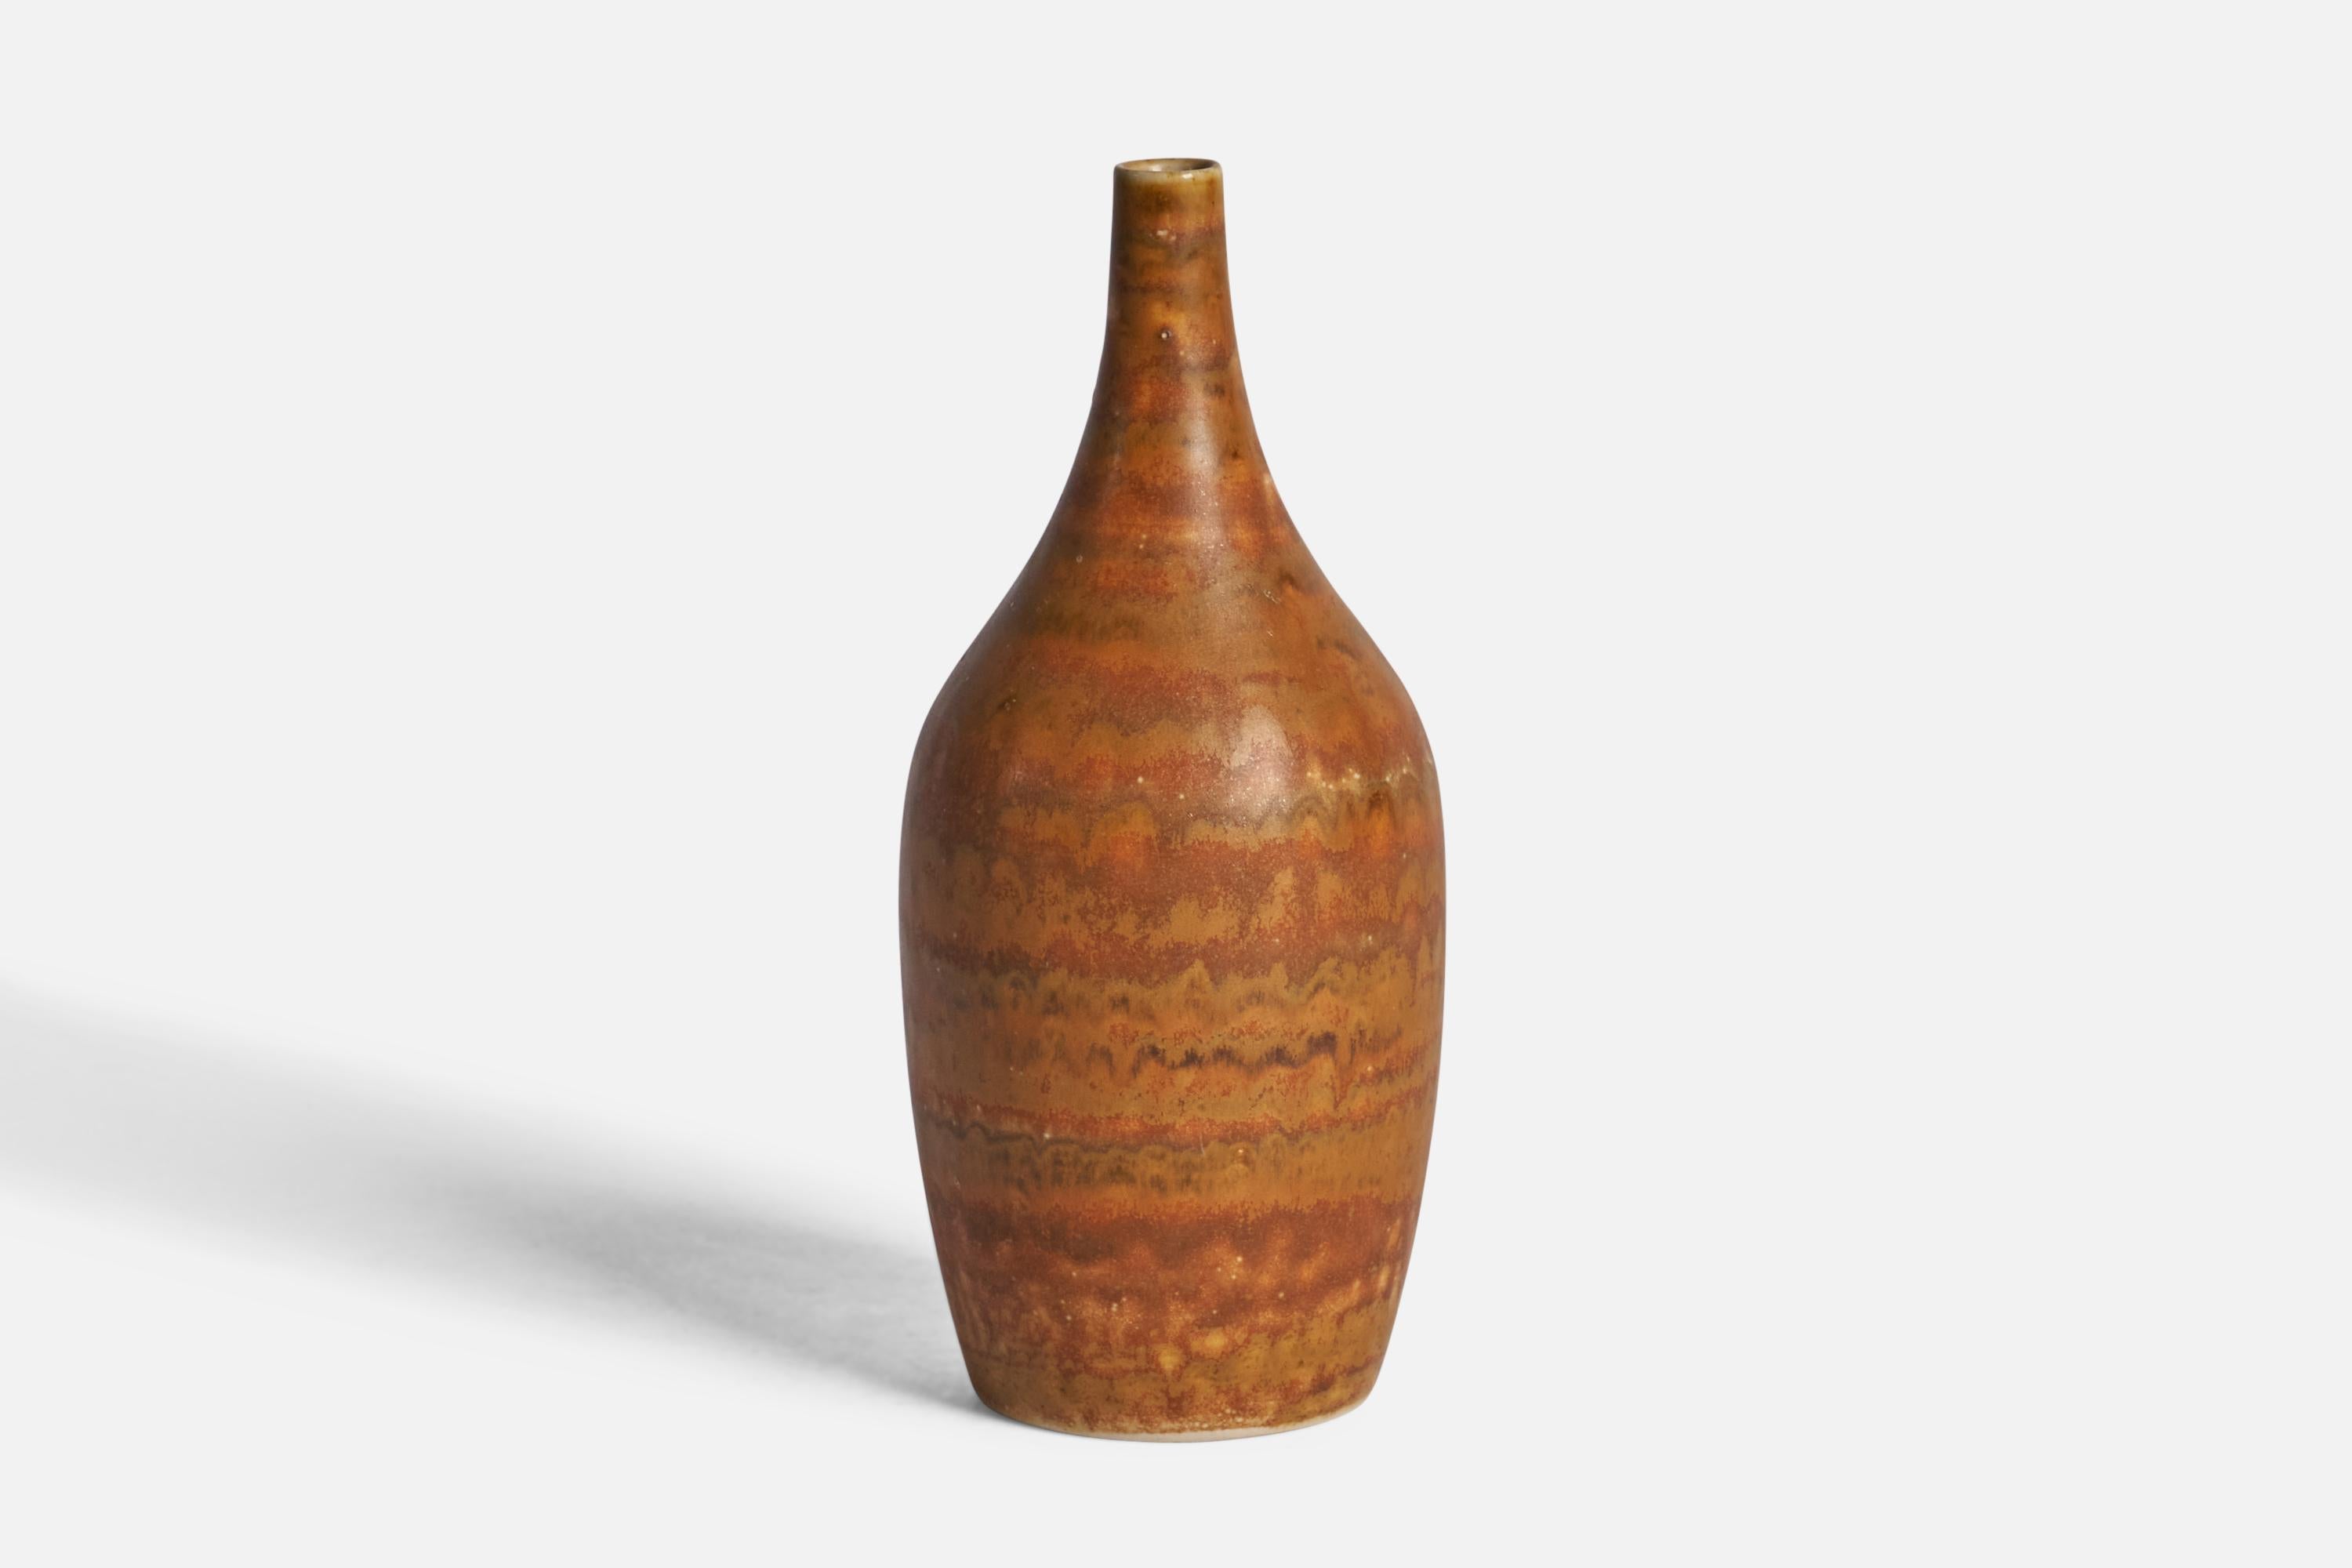 A small brown-glazed stoneware vase designed and produced by Gunnar Borg, Höganäs, Sweden, c. 1960s.

“STENGODS” “HÖGANAS” signature on bottom